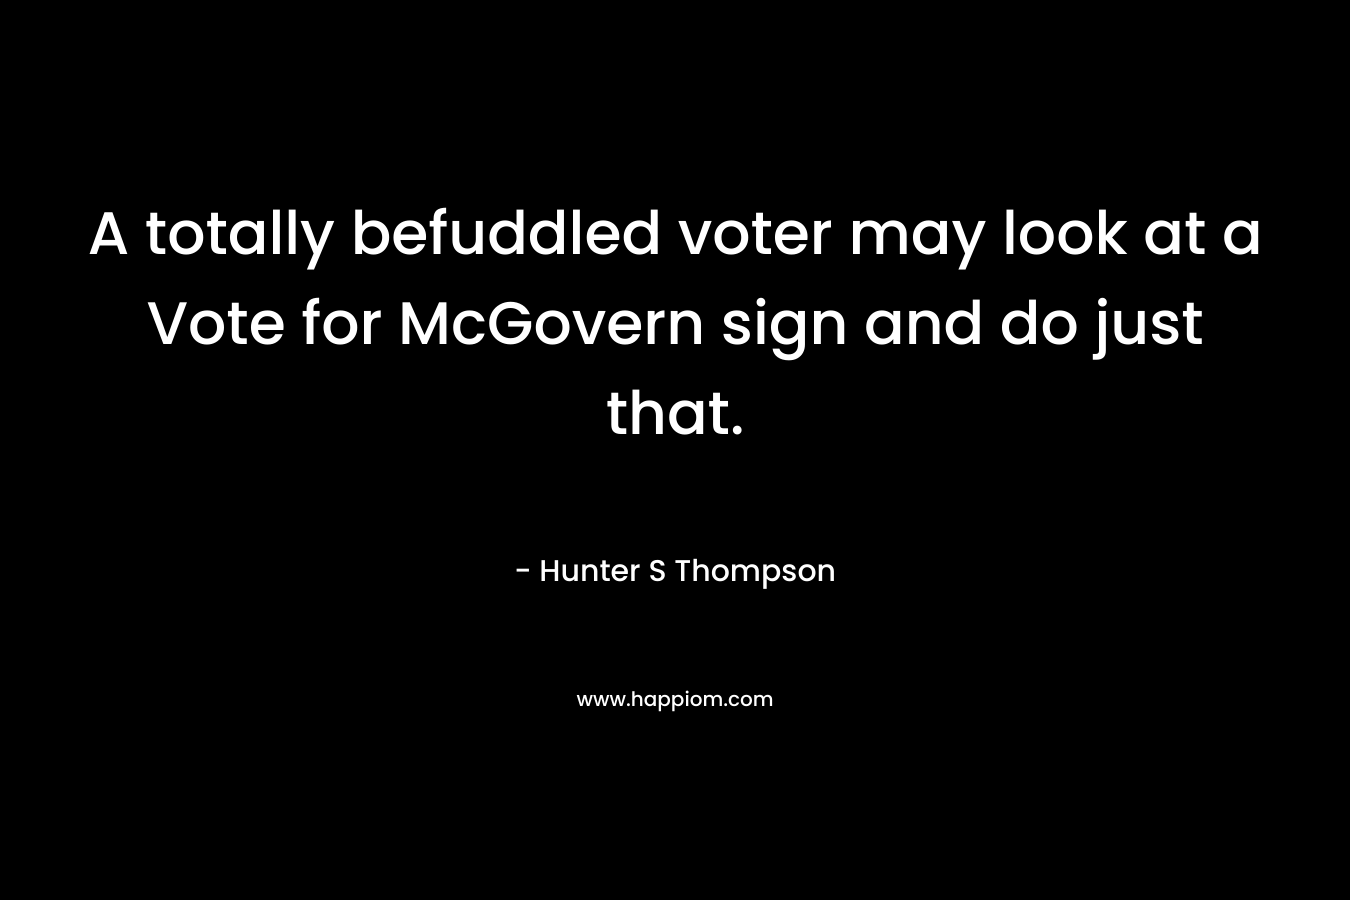 A totally befuddled voter may look at a Vote for McGovern sign and do just that. – Hunter S Thompson